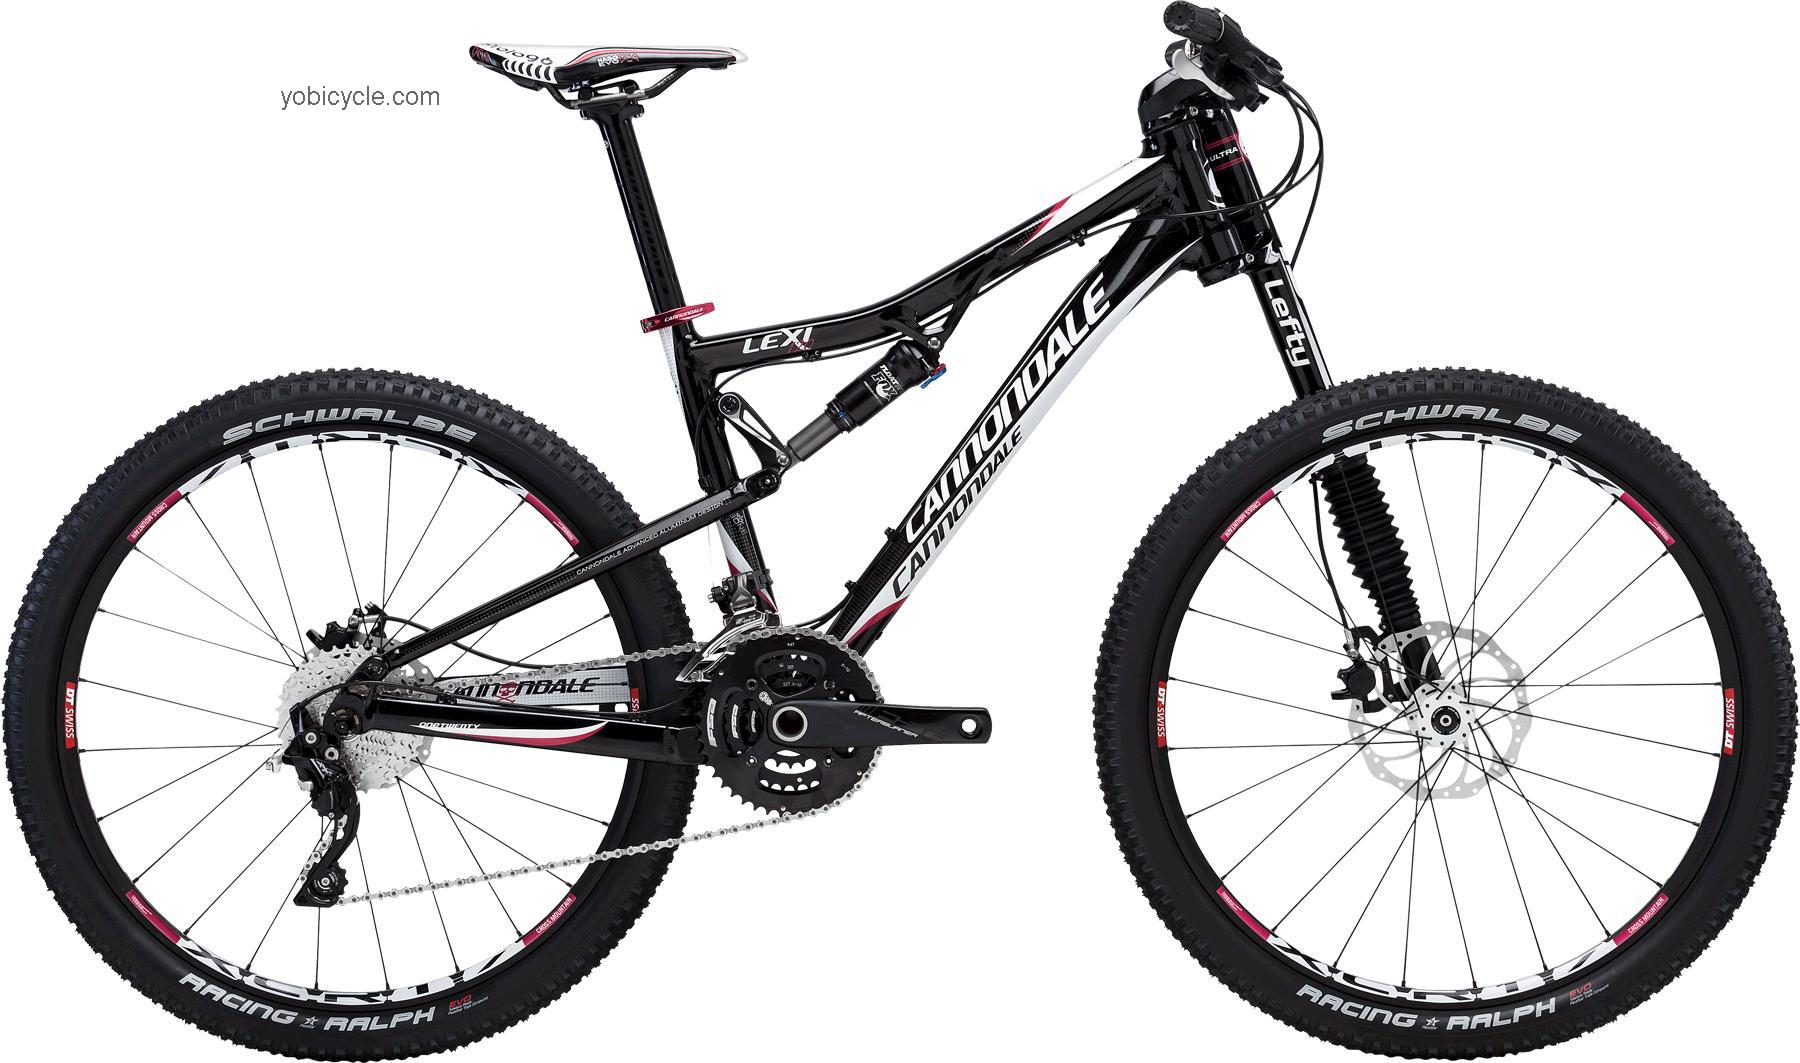 Cannondale Lexi 1 competitors and comparison tool online specs and performance